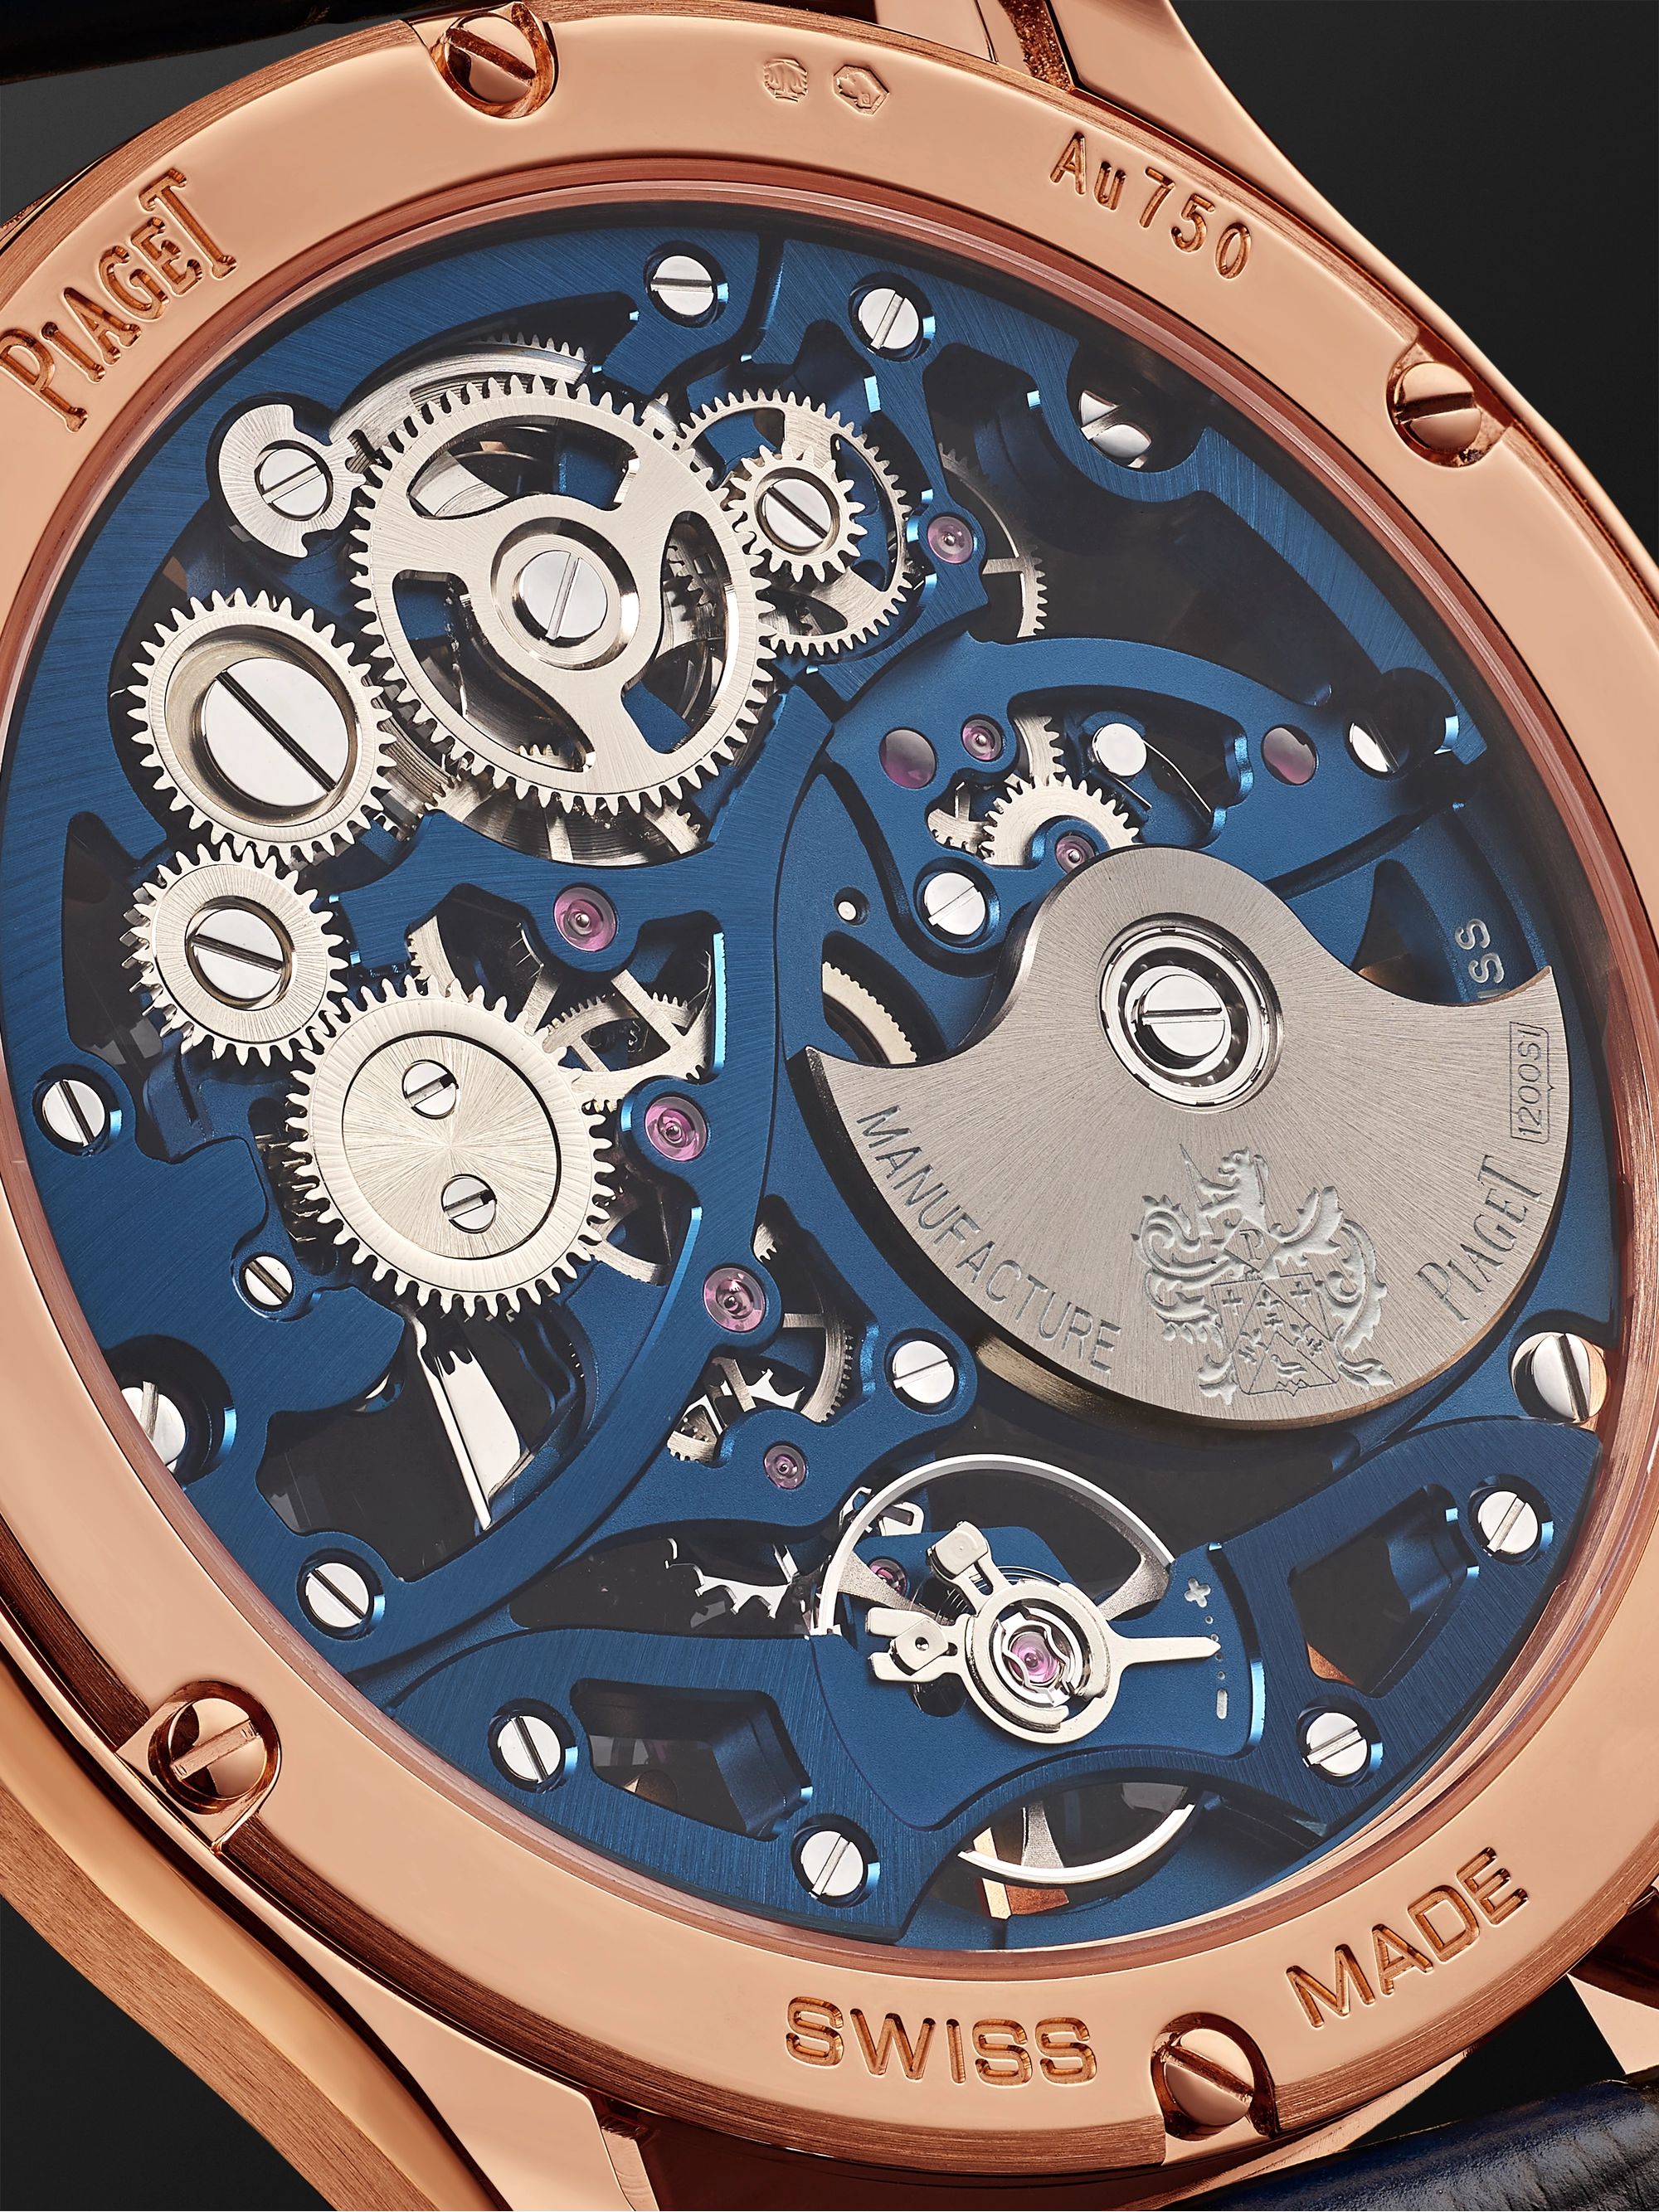 PIAGET Polo Skeleton Automatic 42mm 18-Karat Pink Gold and Alligator Watch, Ref. No. G0A46009